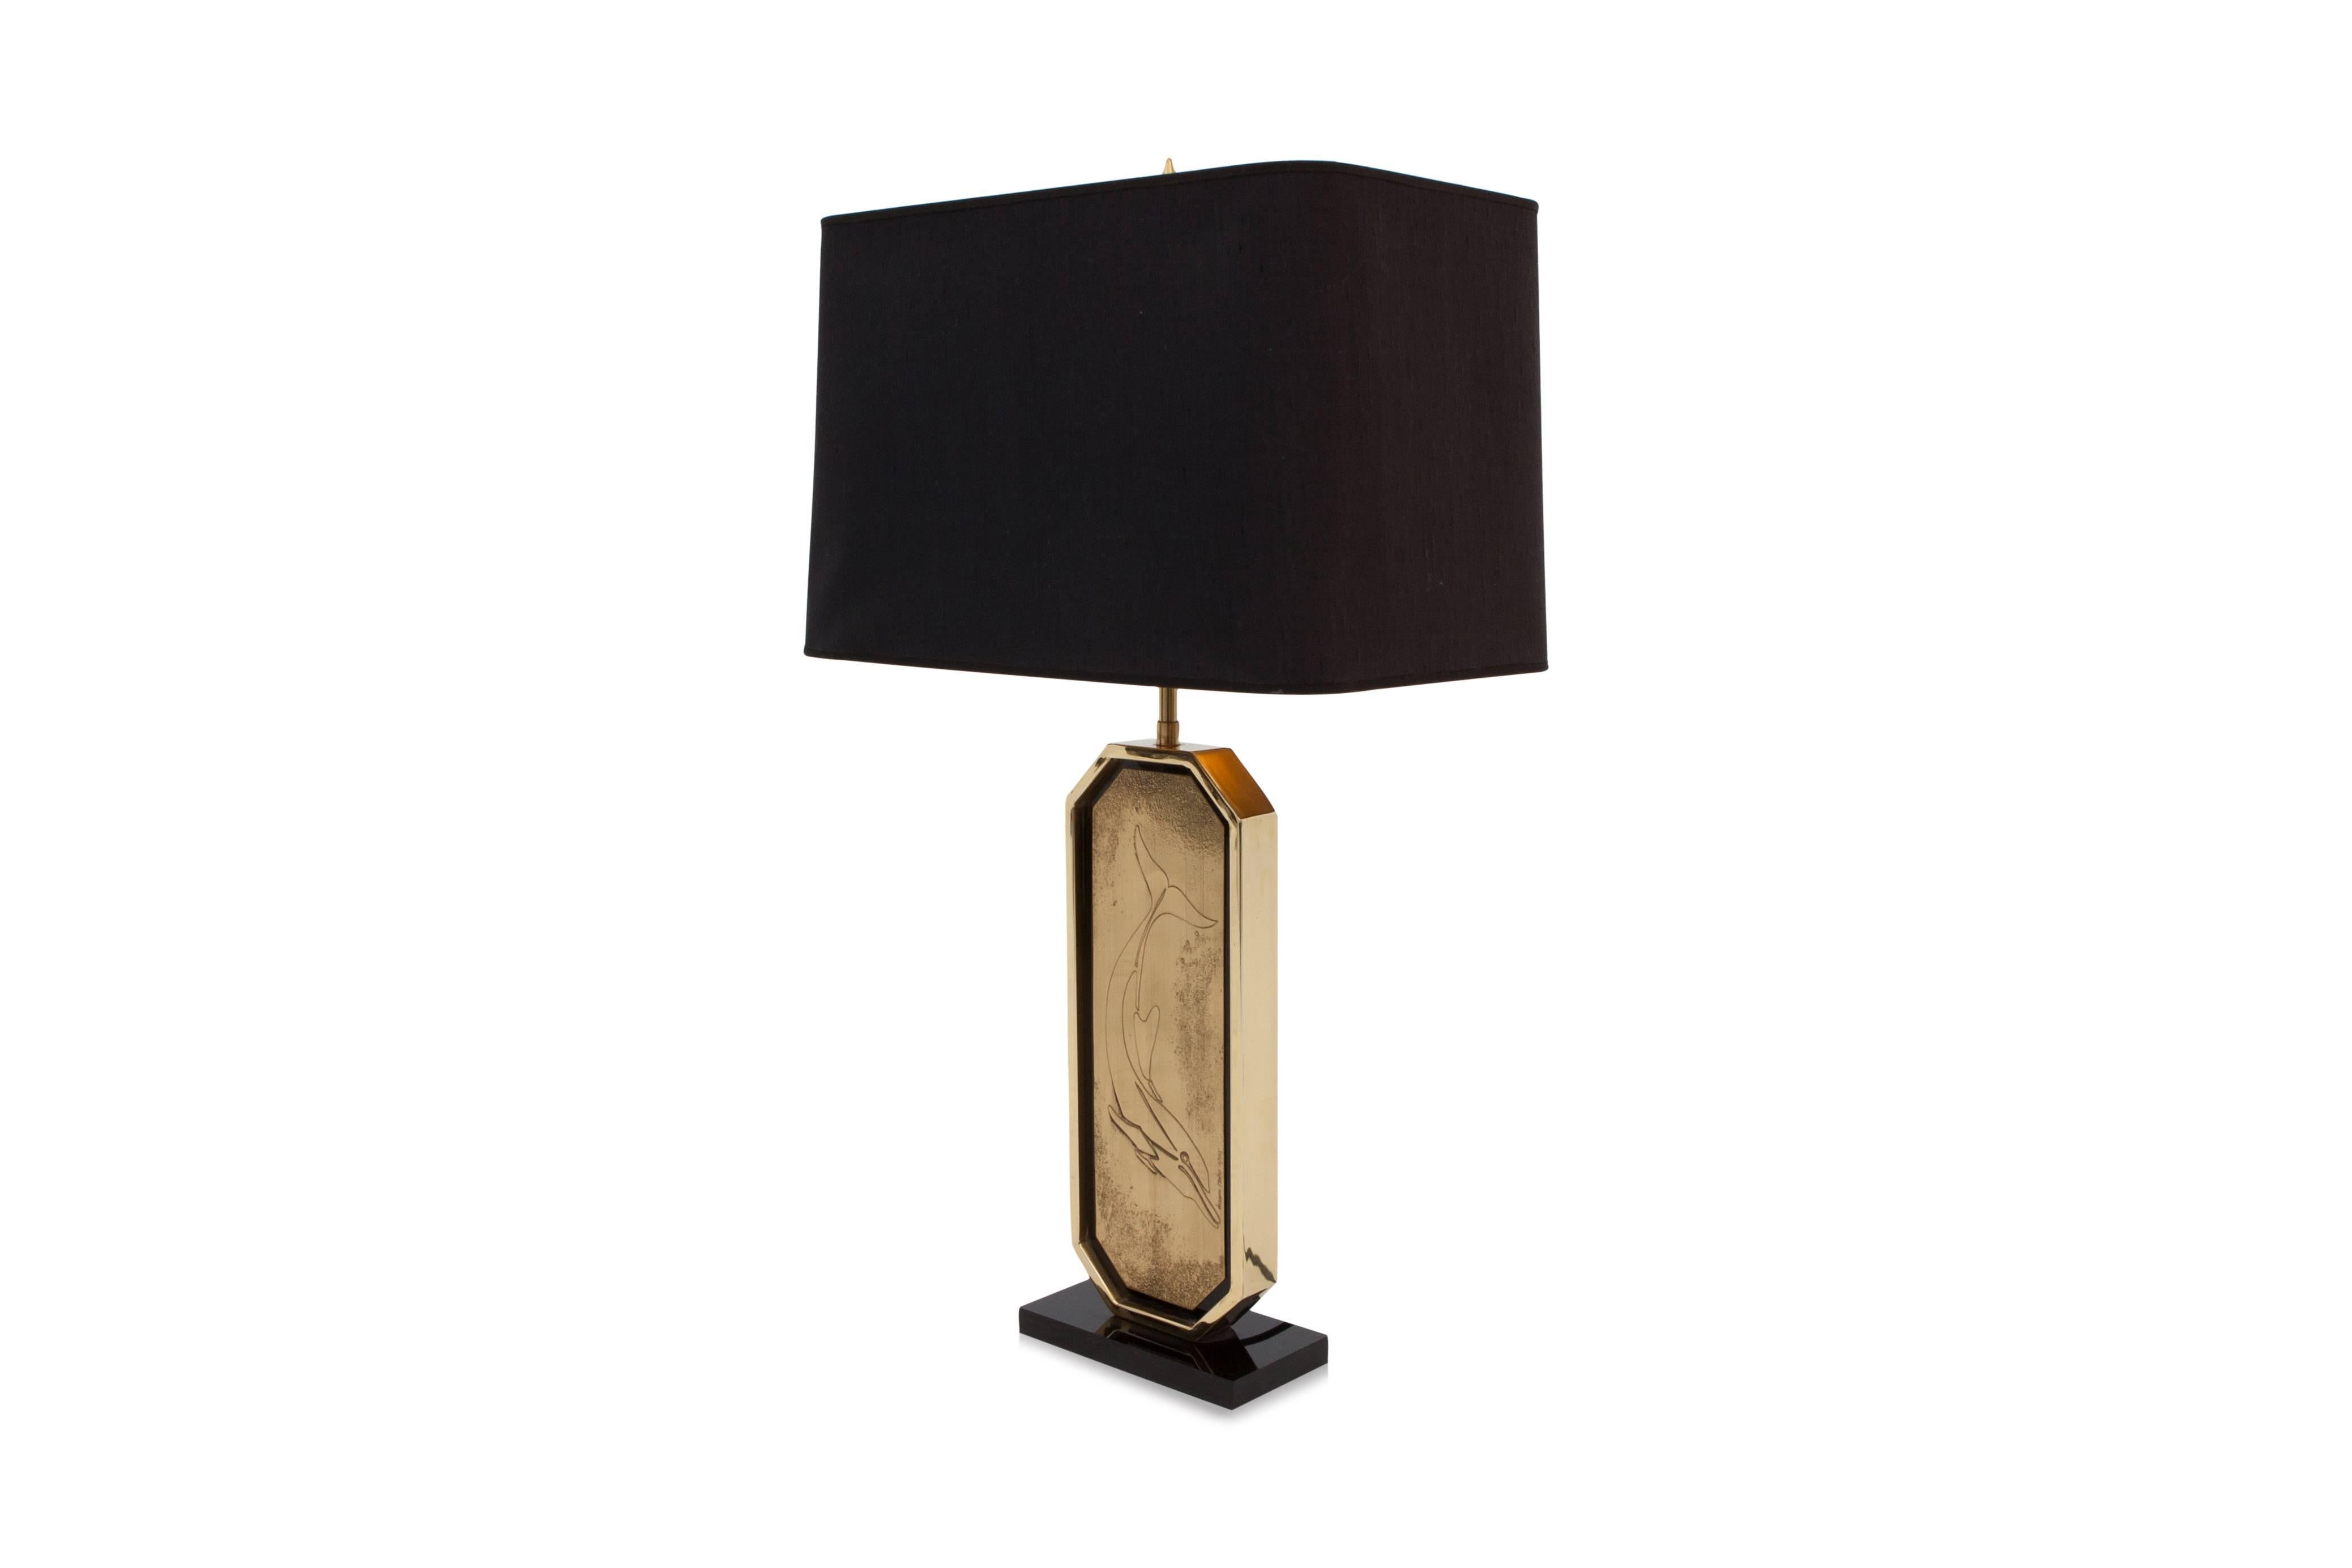 Hollywood Regency style lamp.

Brass etched artwork by Maho (attributed as alter ego of George Matthias).
Black glass centre with 23-karat gold edges.
Black linen shade,

Belgium, 1980s.

Measures: H 80 cm, W 27 cm, D 43 cm.